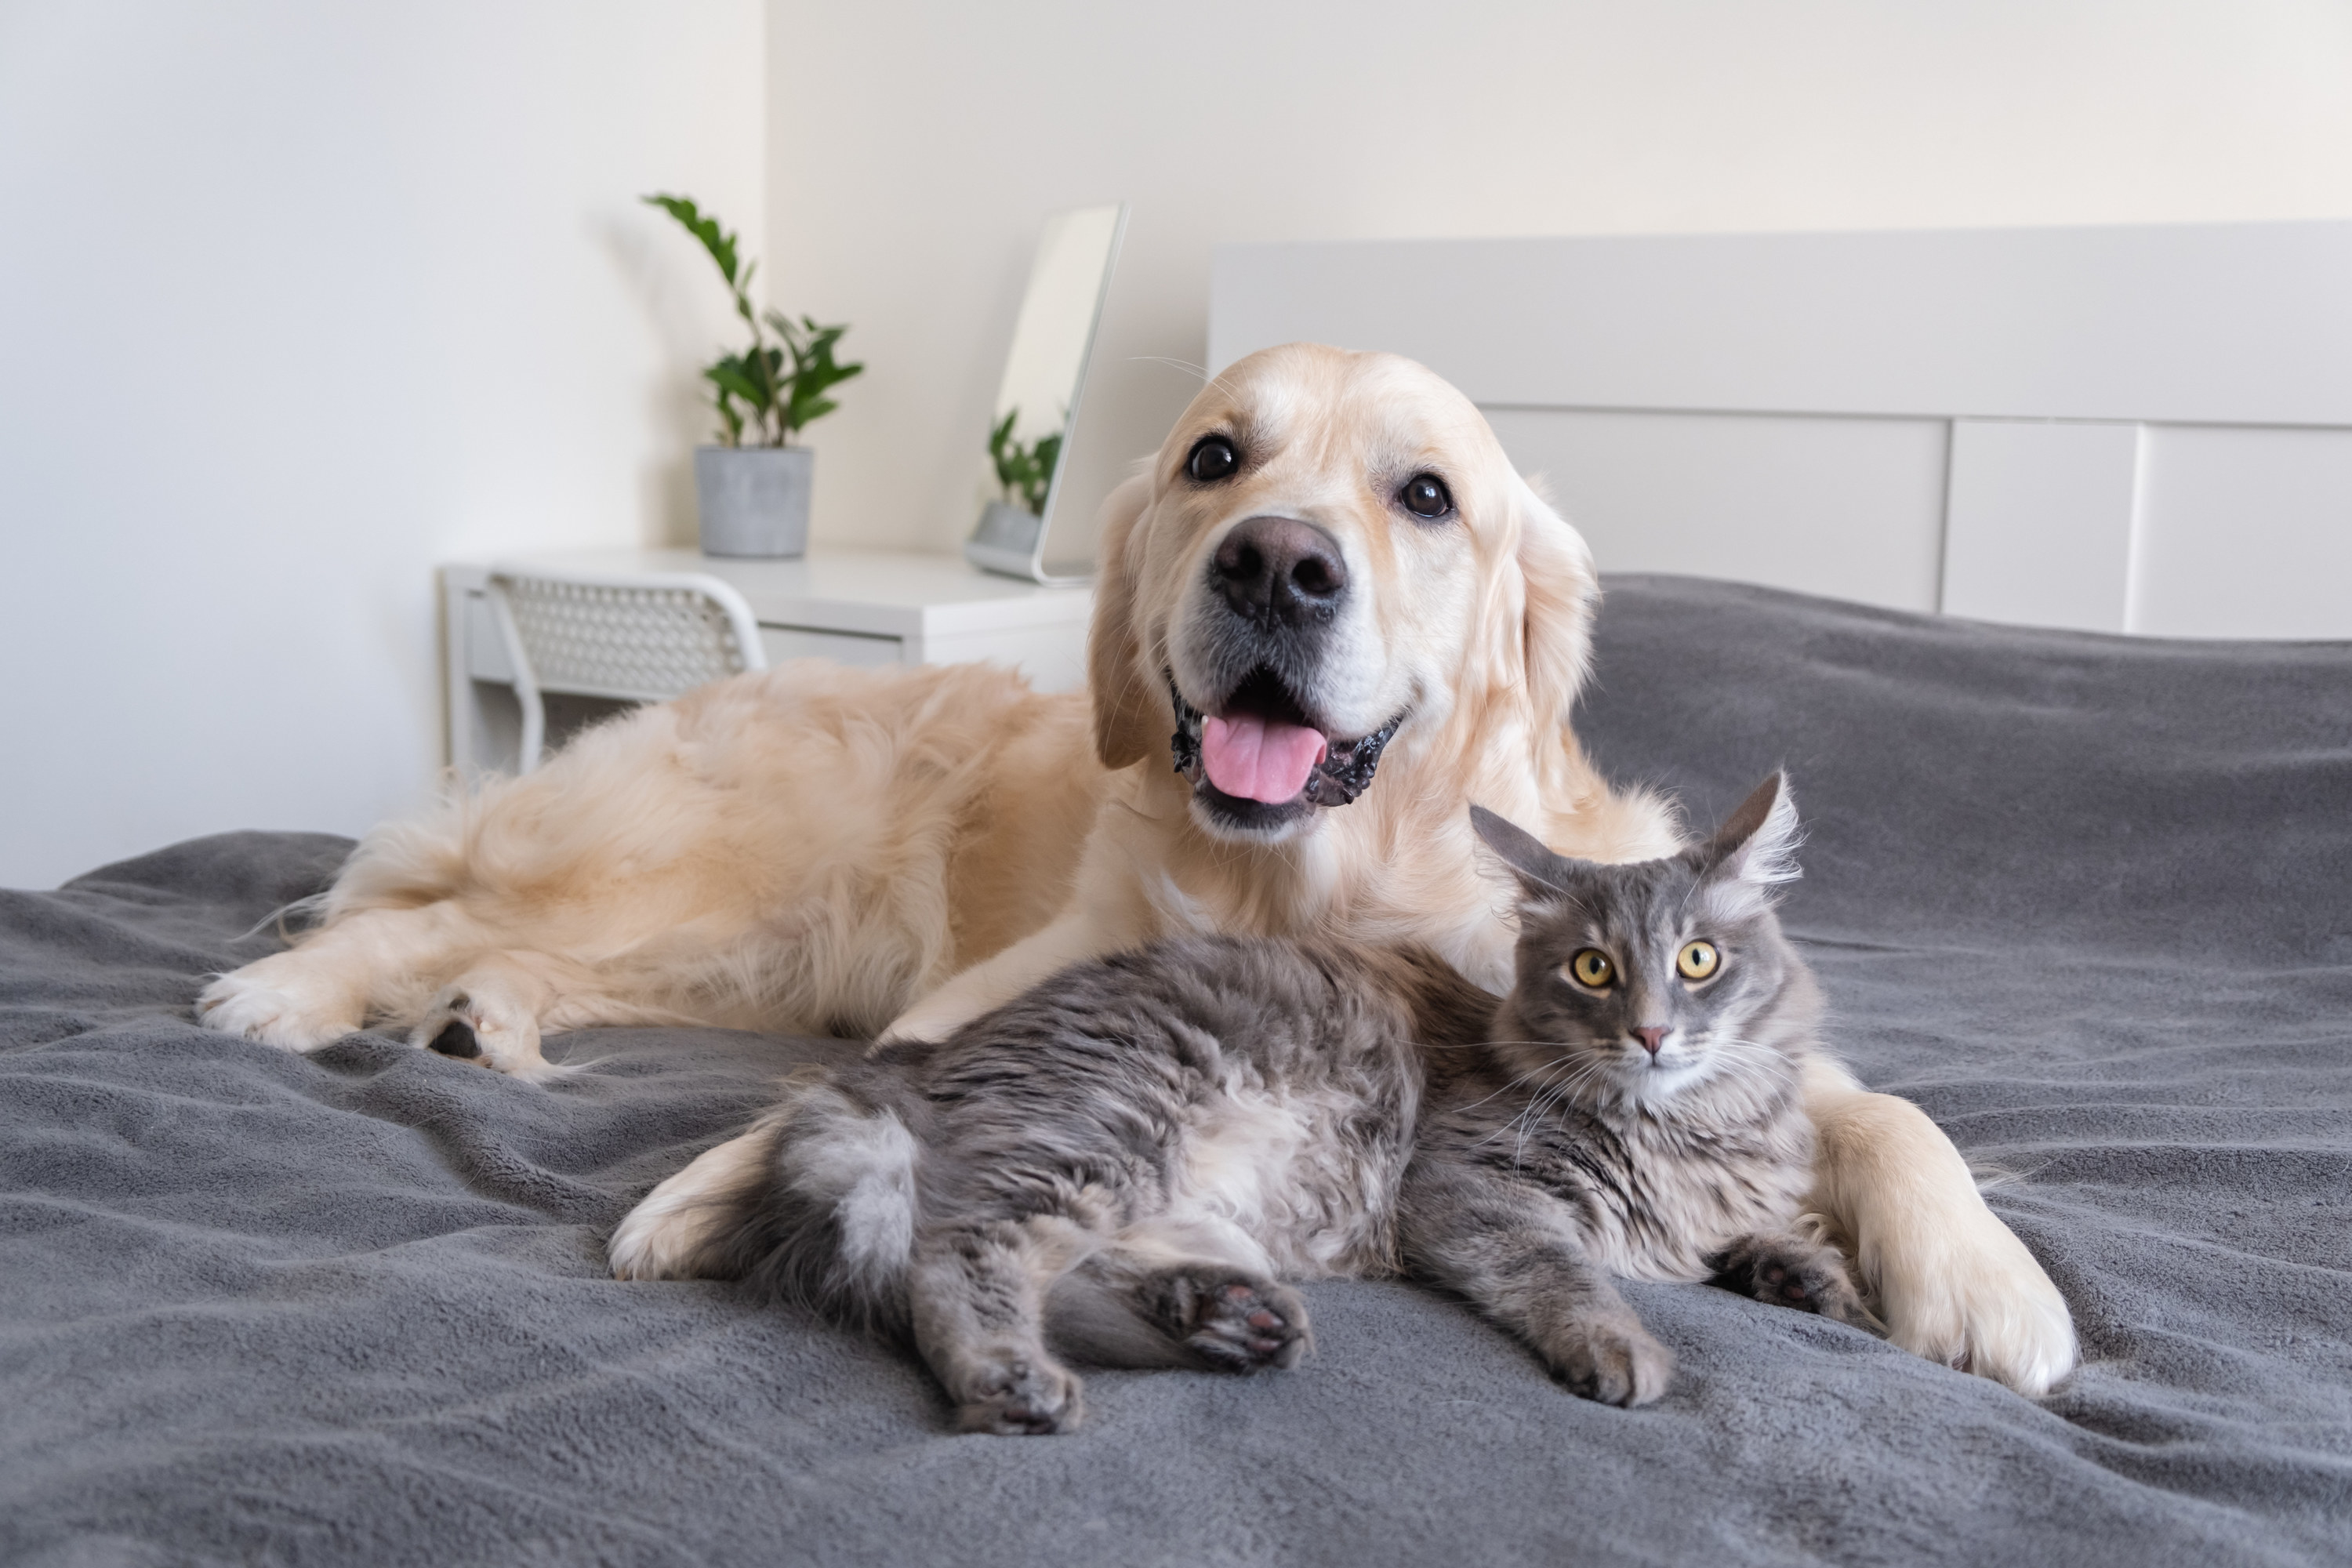 A dog and cat on a bed